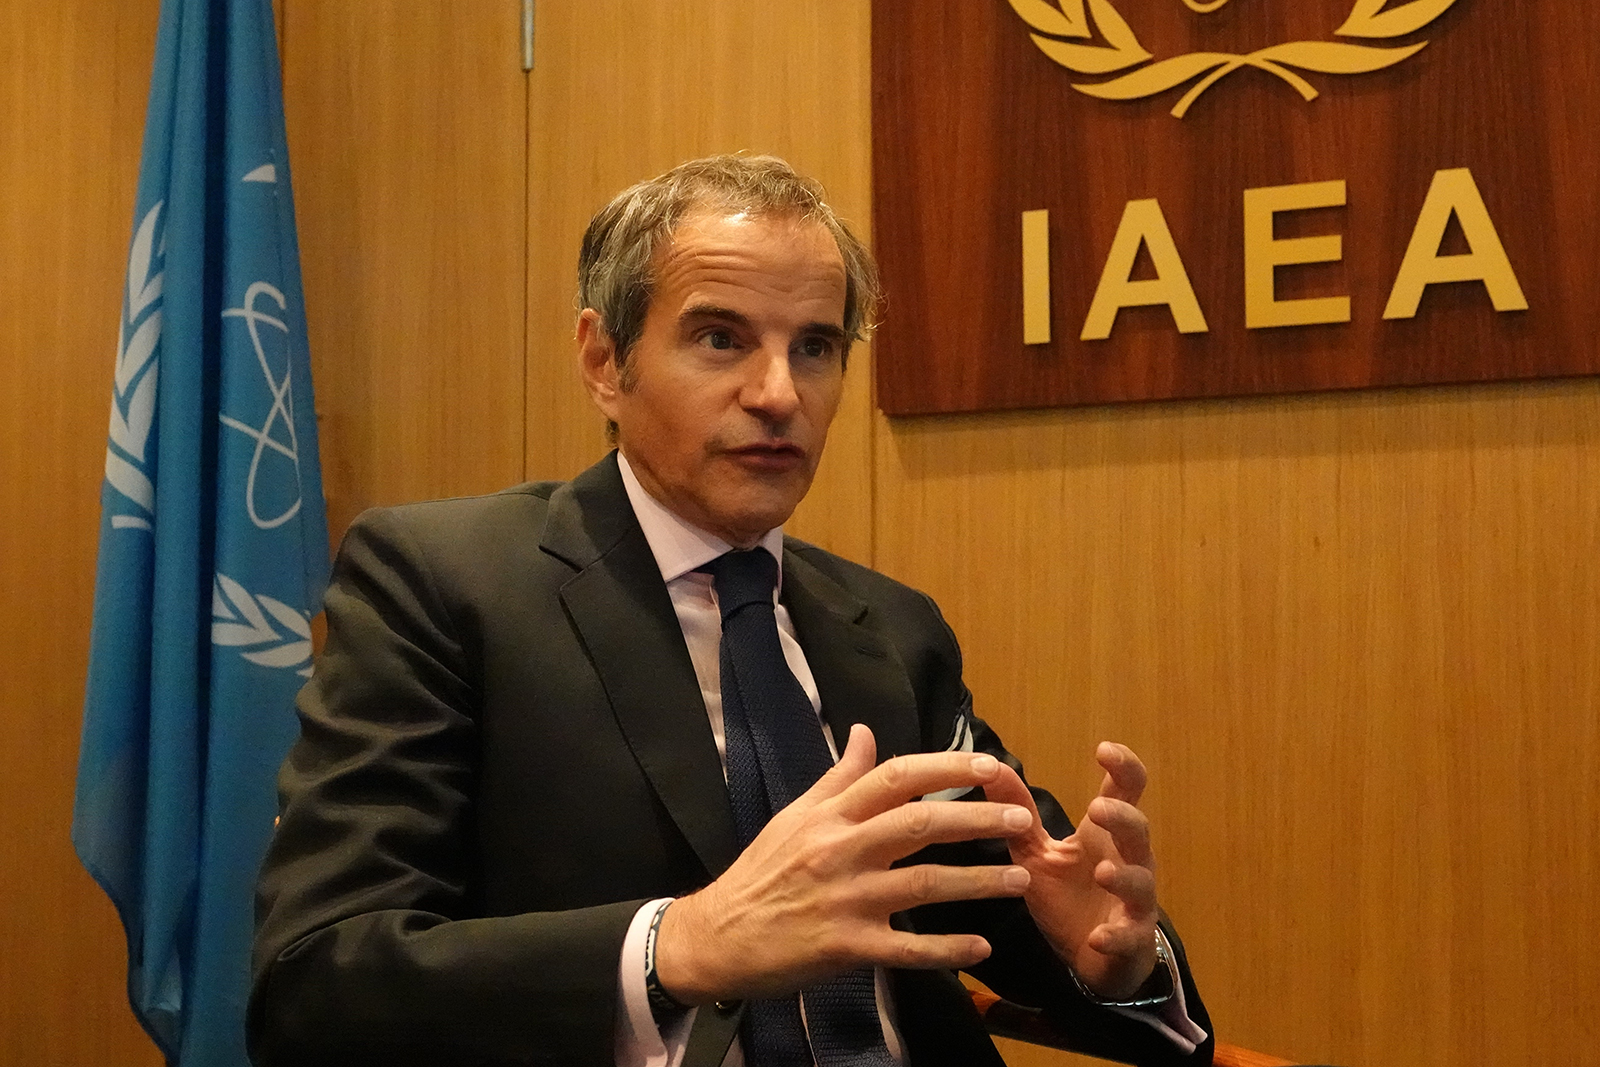 Rafael Grossi speaks during an interview at the IAEA headquarters in Vienna, Austria, on May 12.